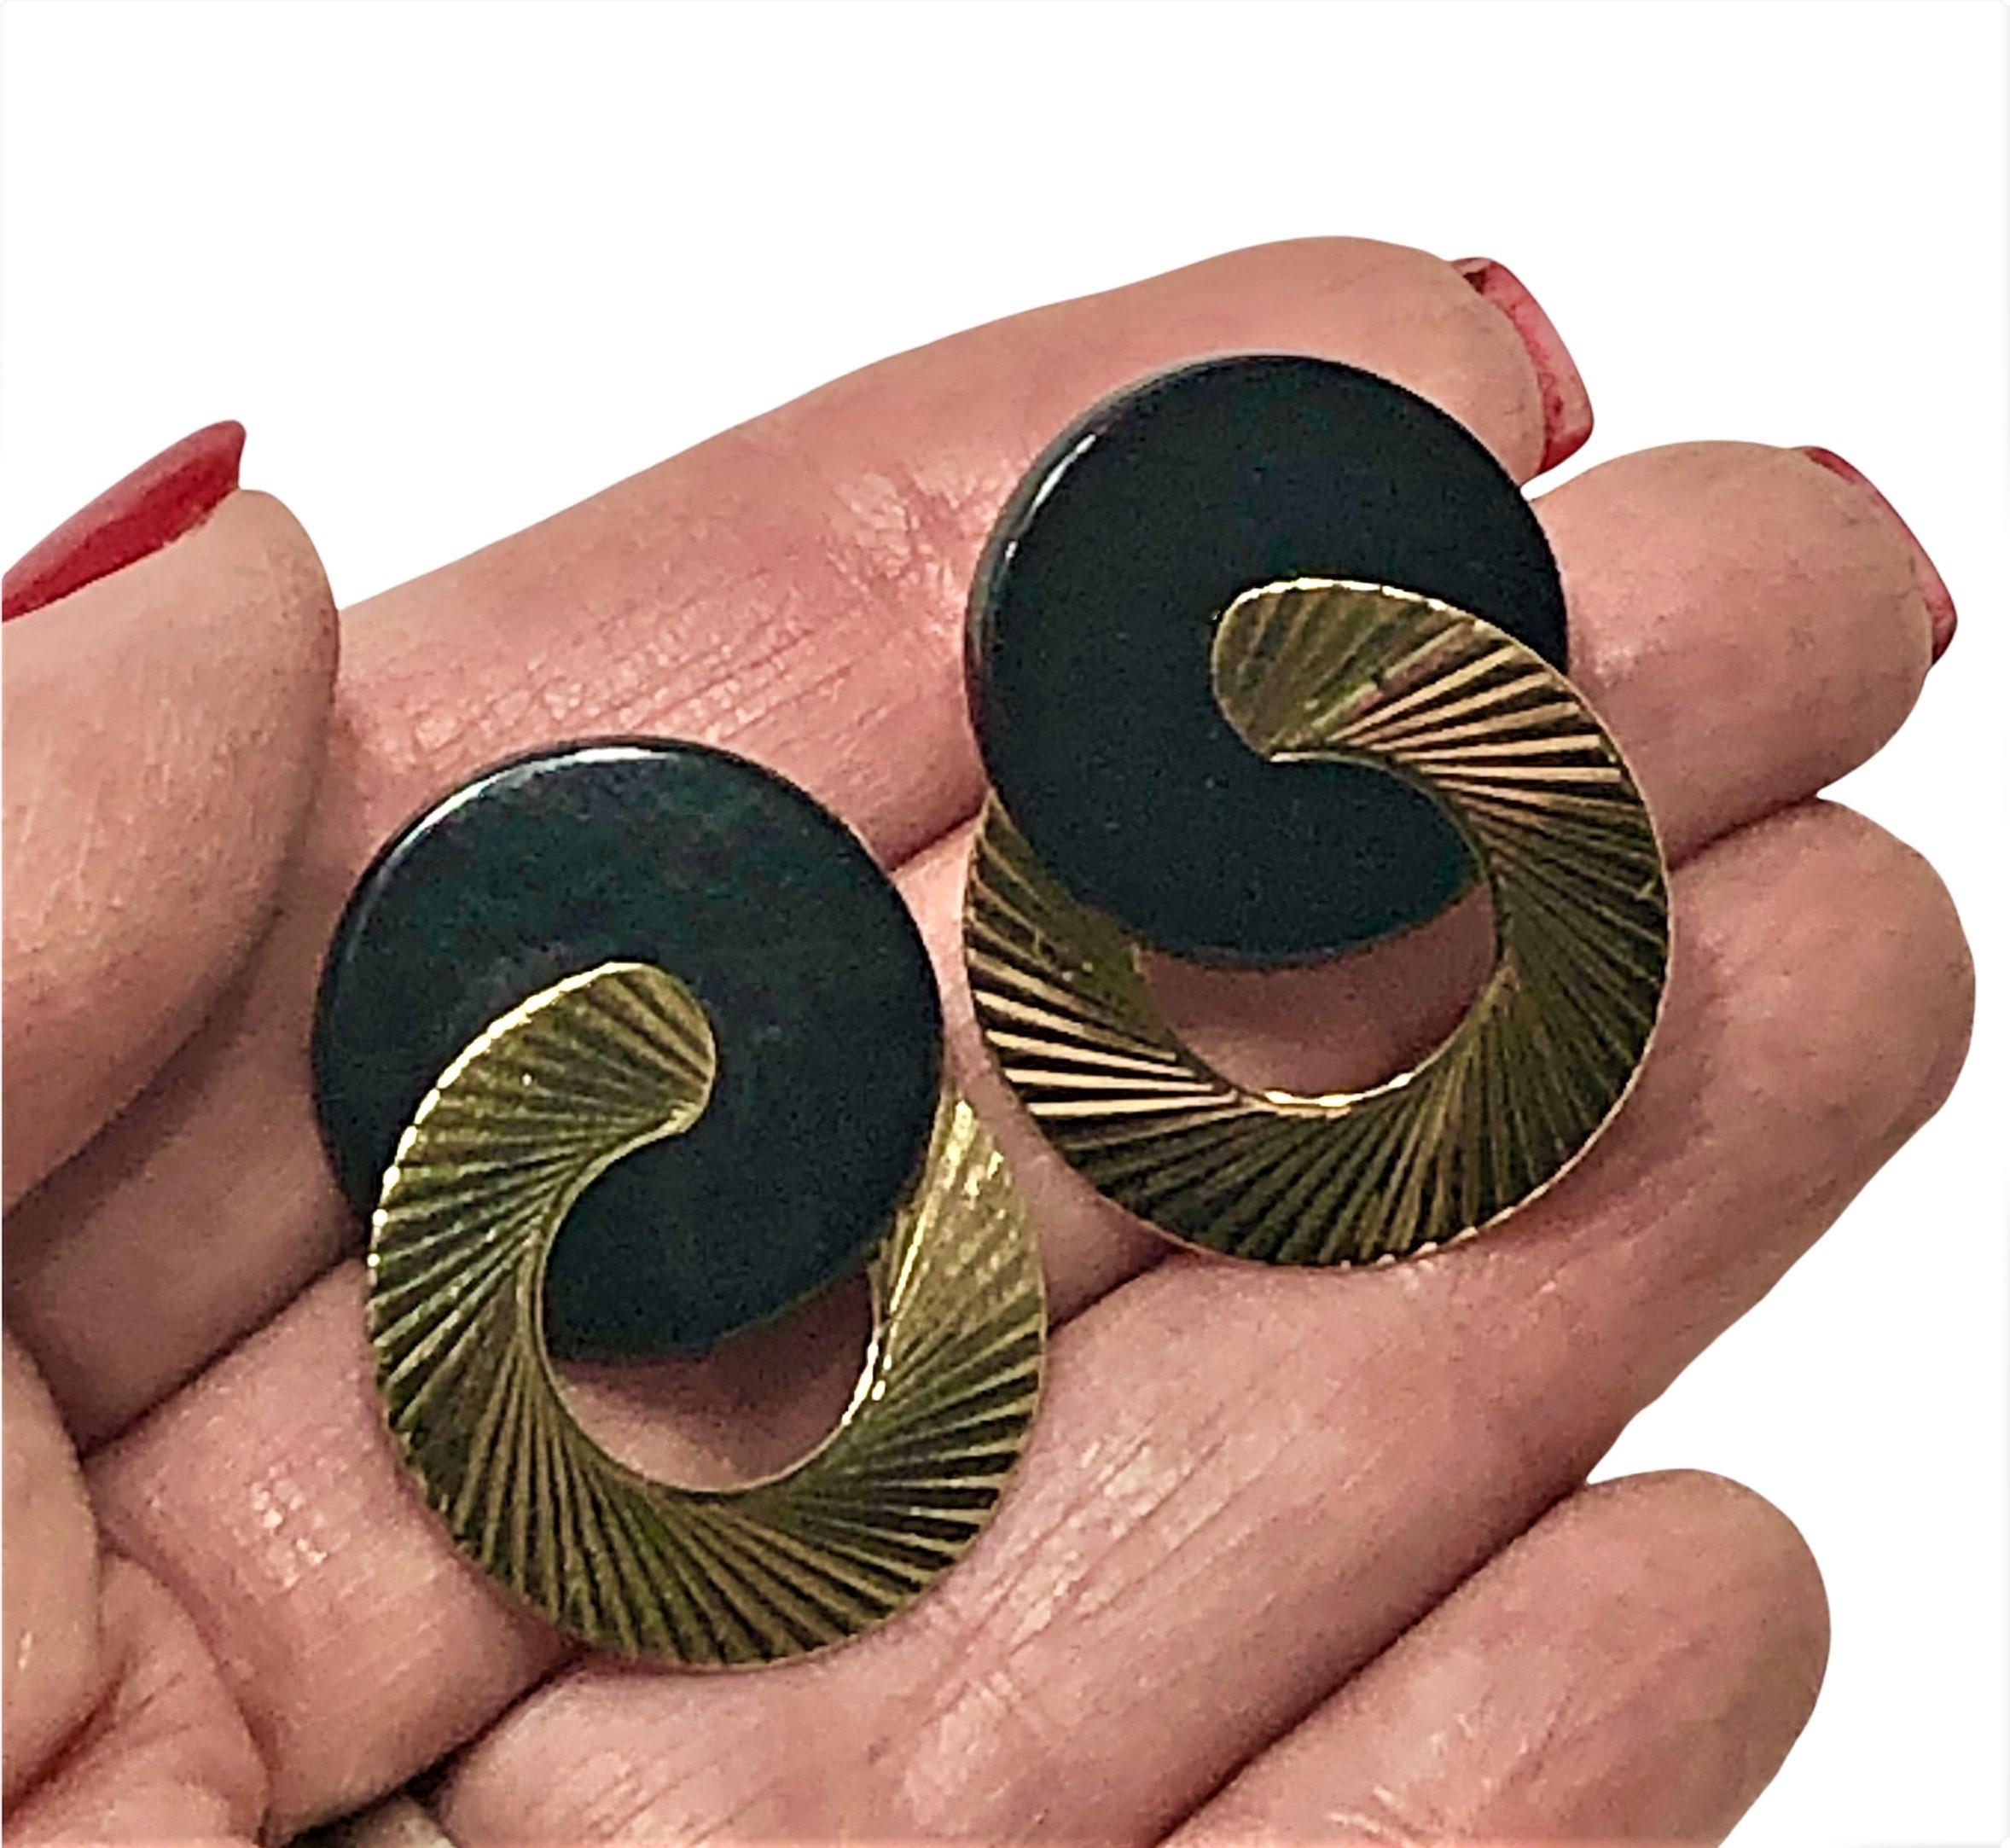 This great looking pair of modernist earrings are made up from interlocking onyx discs and fluted 14K yellow gold discs that shimmer in the light. Each onyx disc measures 3/4 inch in diameter and each fluted gold disc measures 7/8 inch  in diameter.